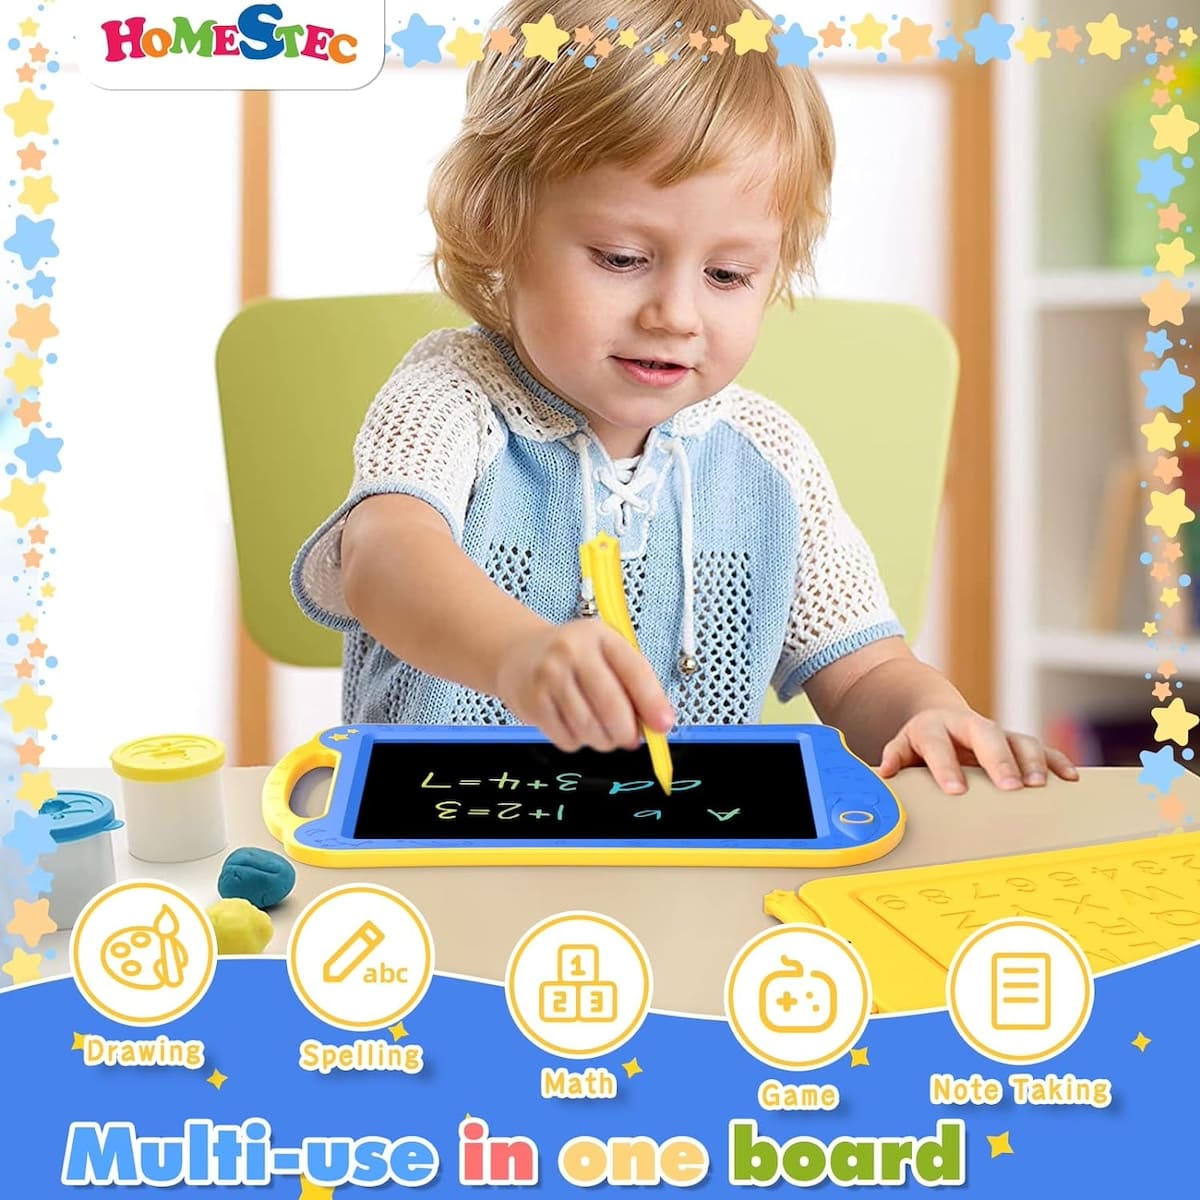 Magic tablet for drawing with LCD display for children kids